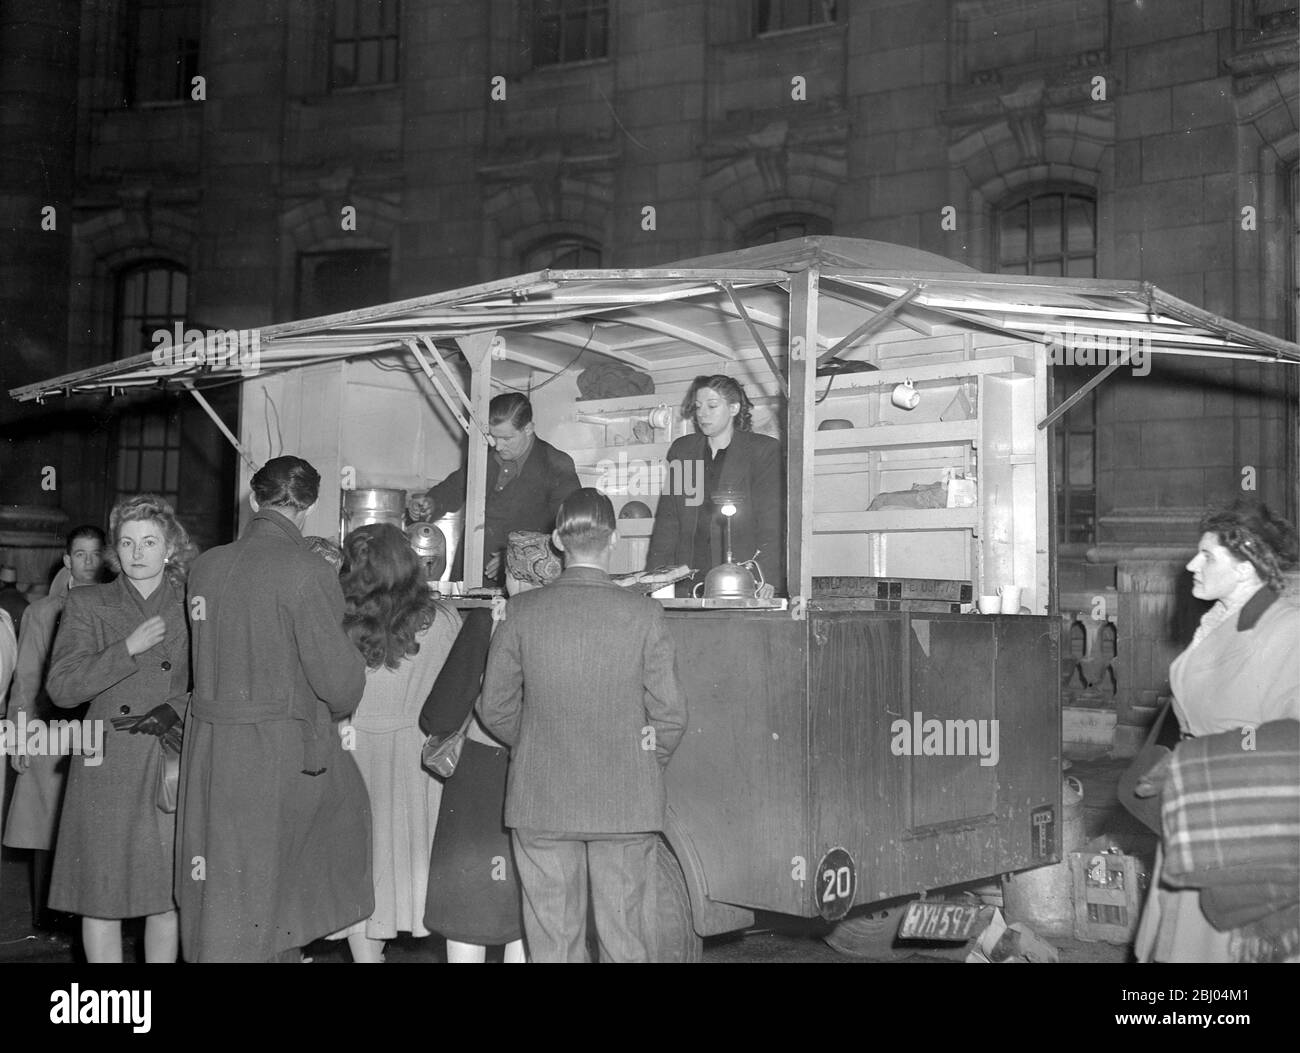 Royal Wedding. - One of the most popular spots for the crowds who decided to brave the weather and make sure they would get a good view of the Royal Wedding was this coffee stall one of many which was serving food and drinks near the Admiralty Arch. - 20 November 1947 Stock Photo